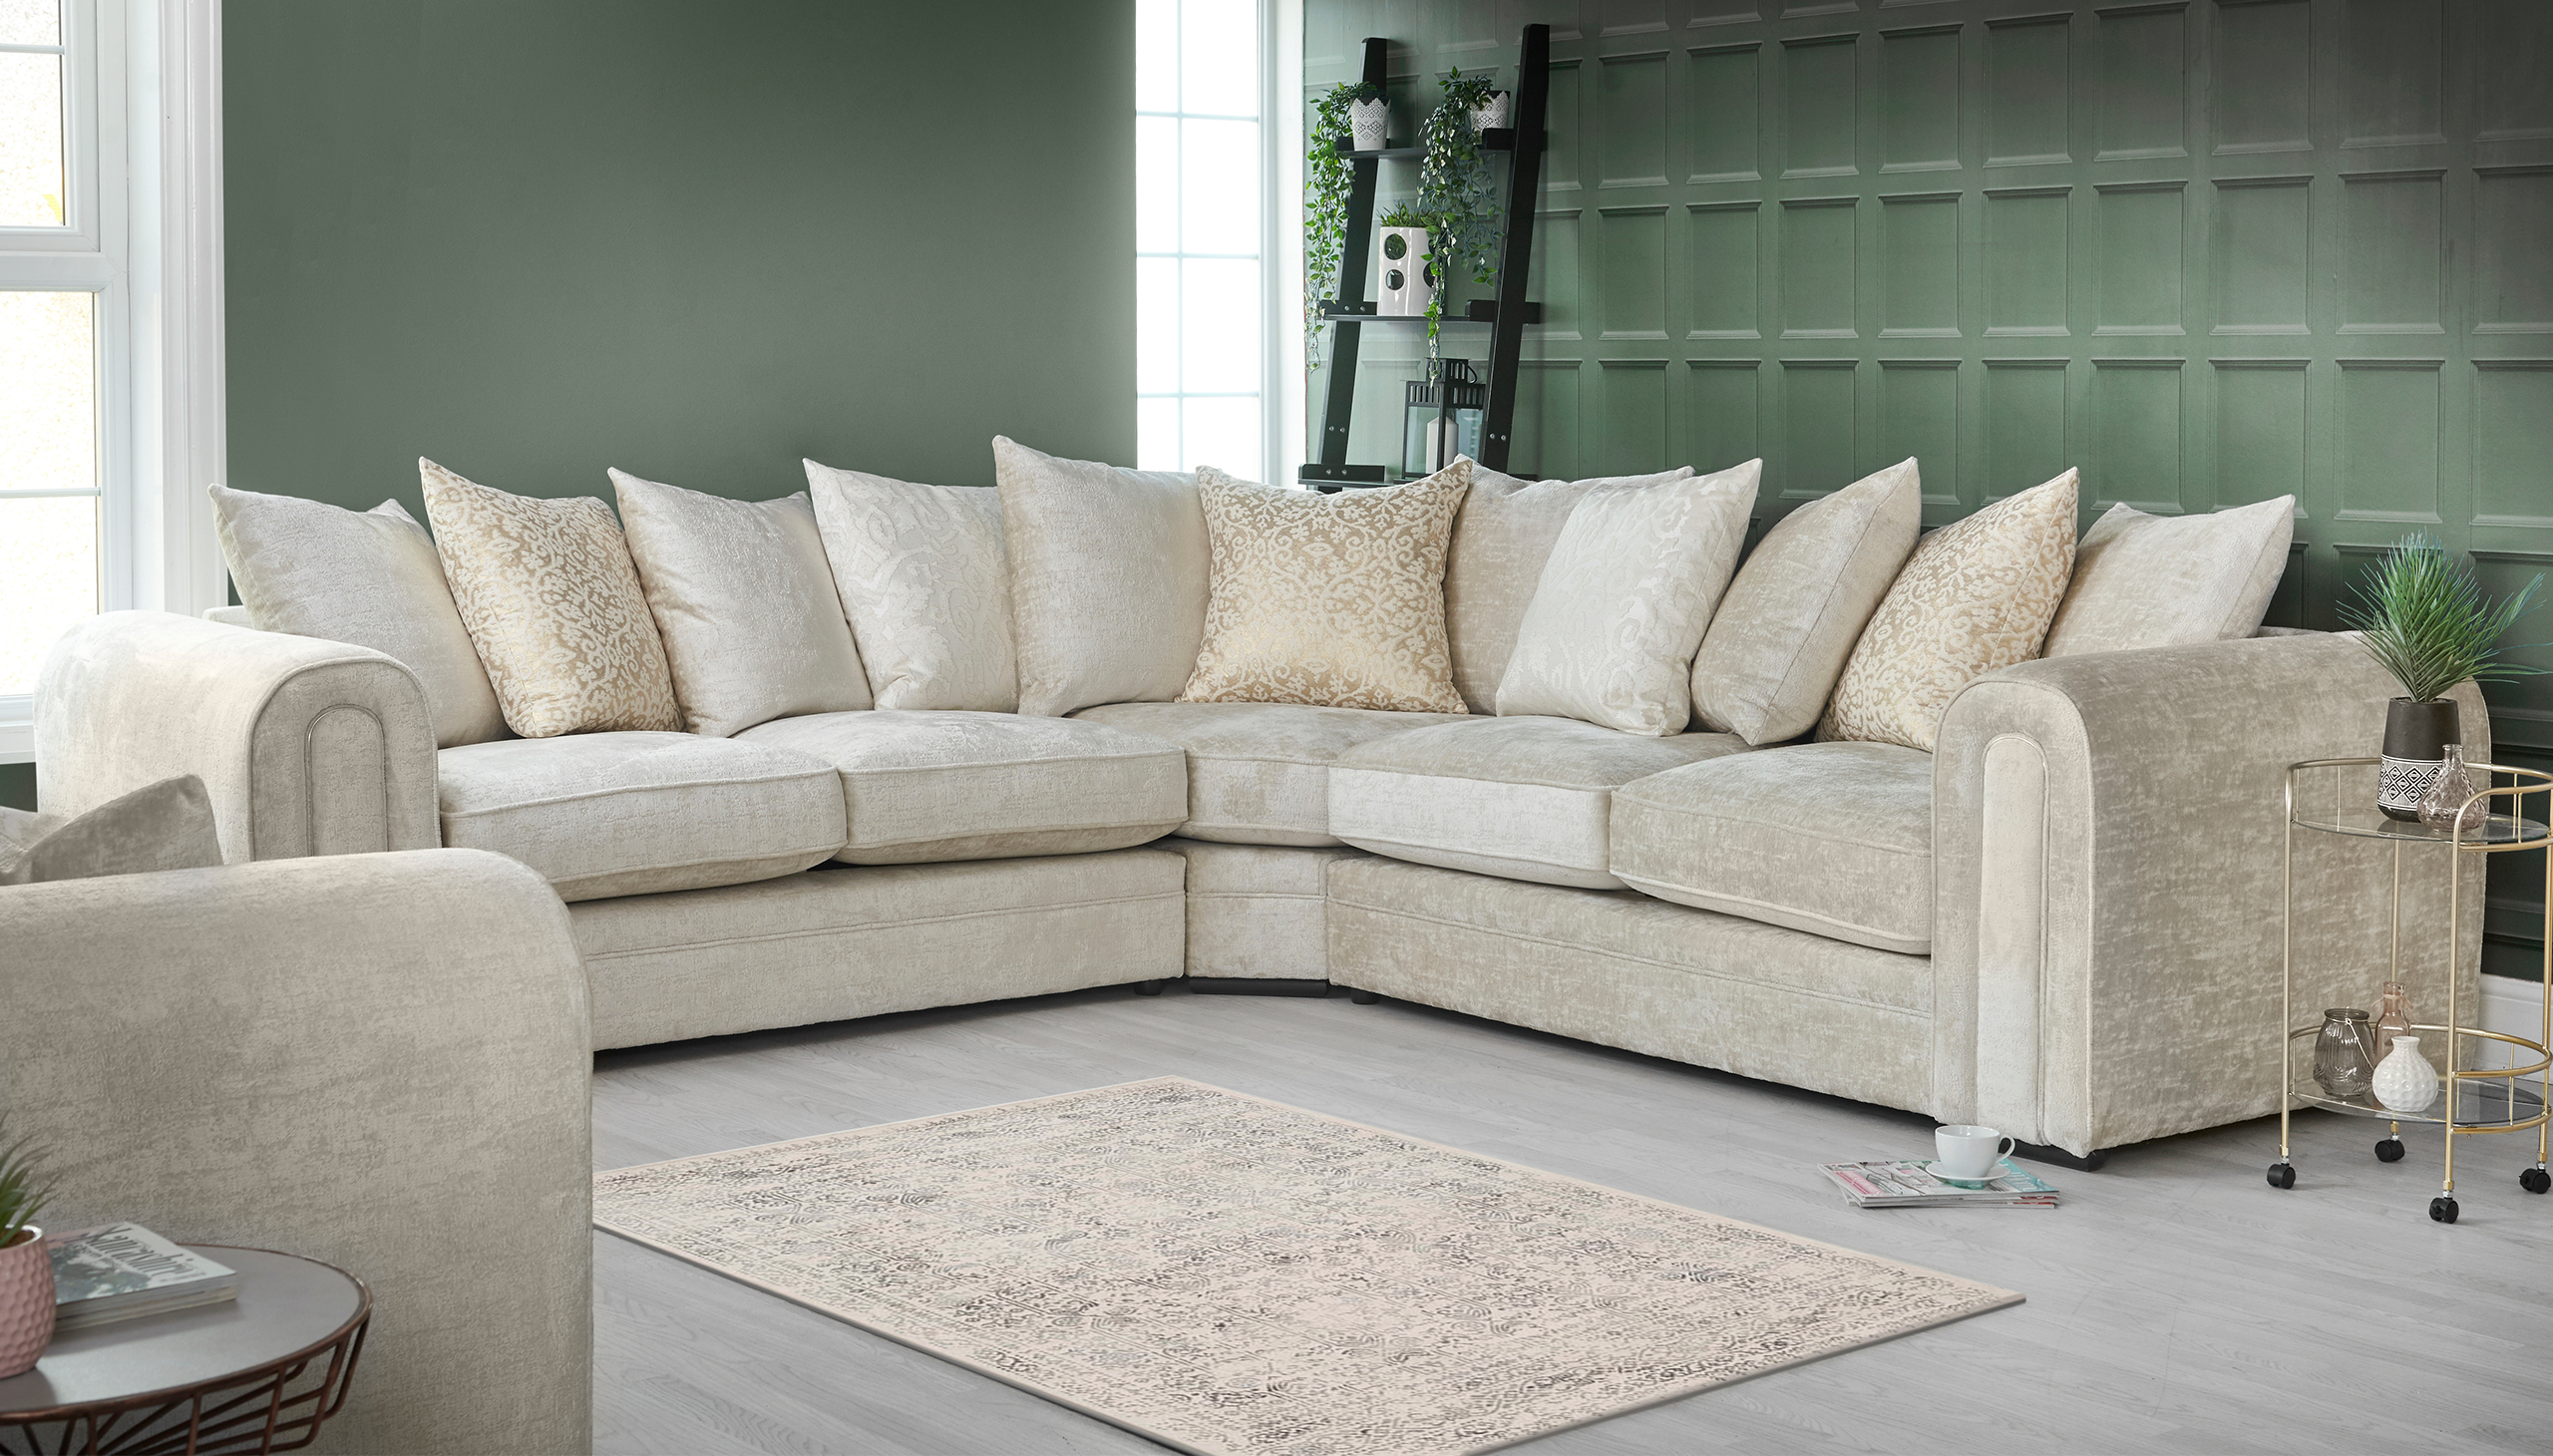 Gatsby 4 Seater Scatter Back Sofa